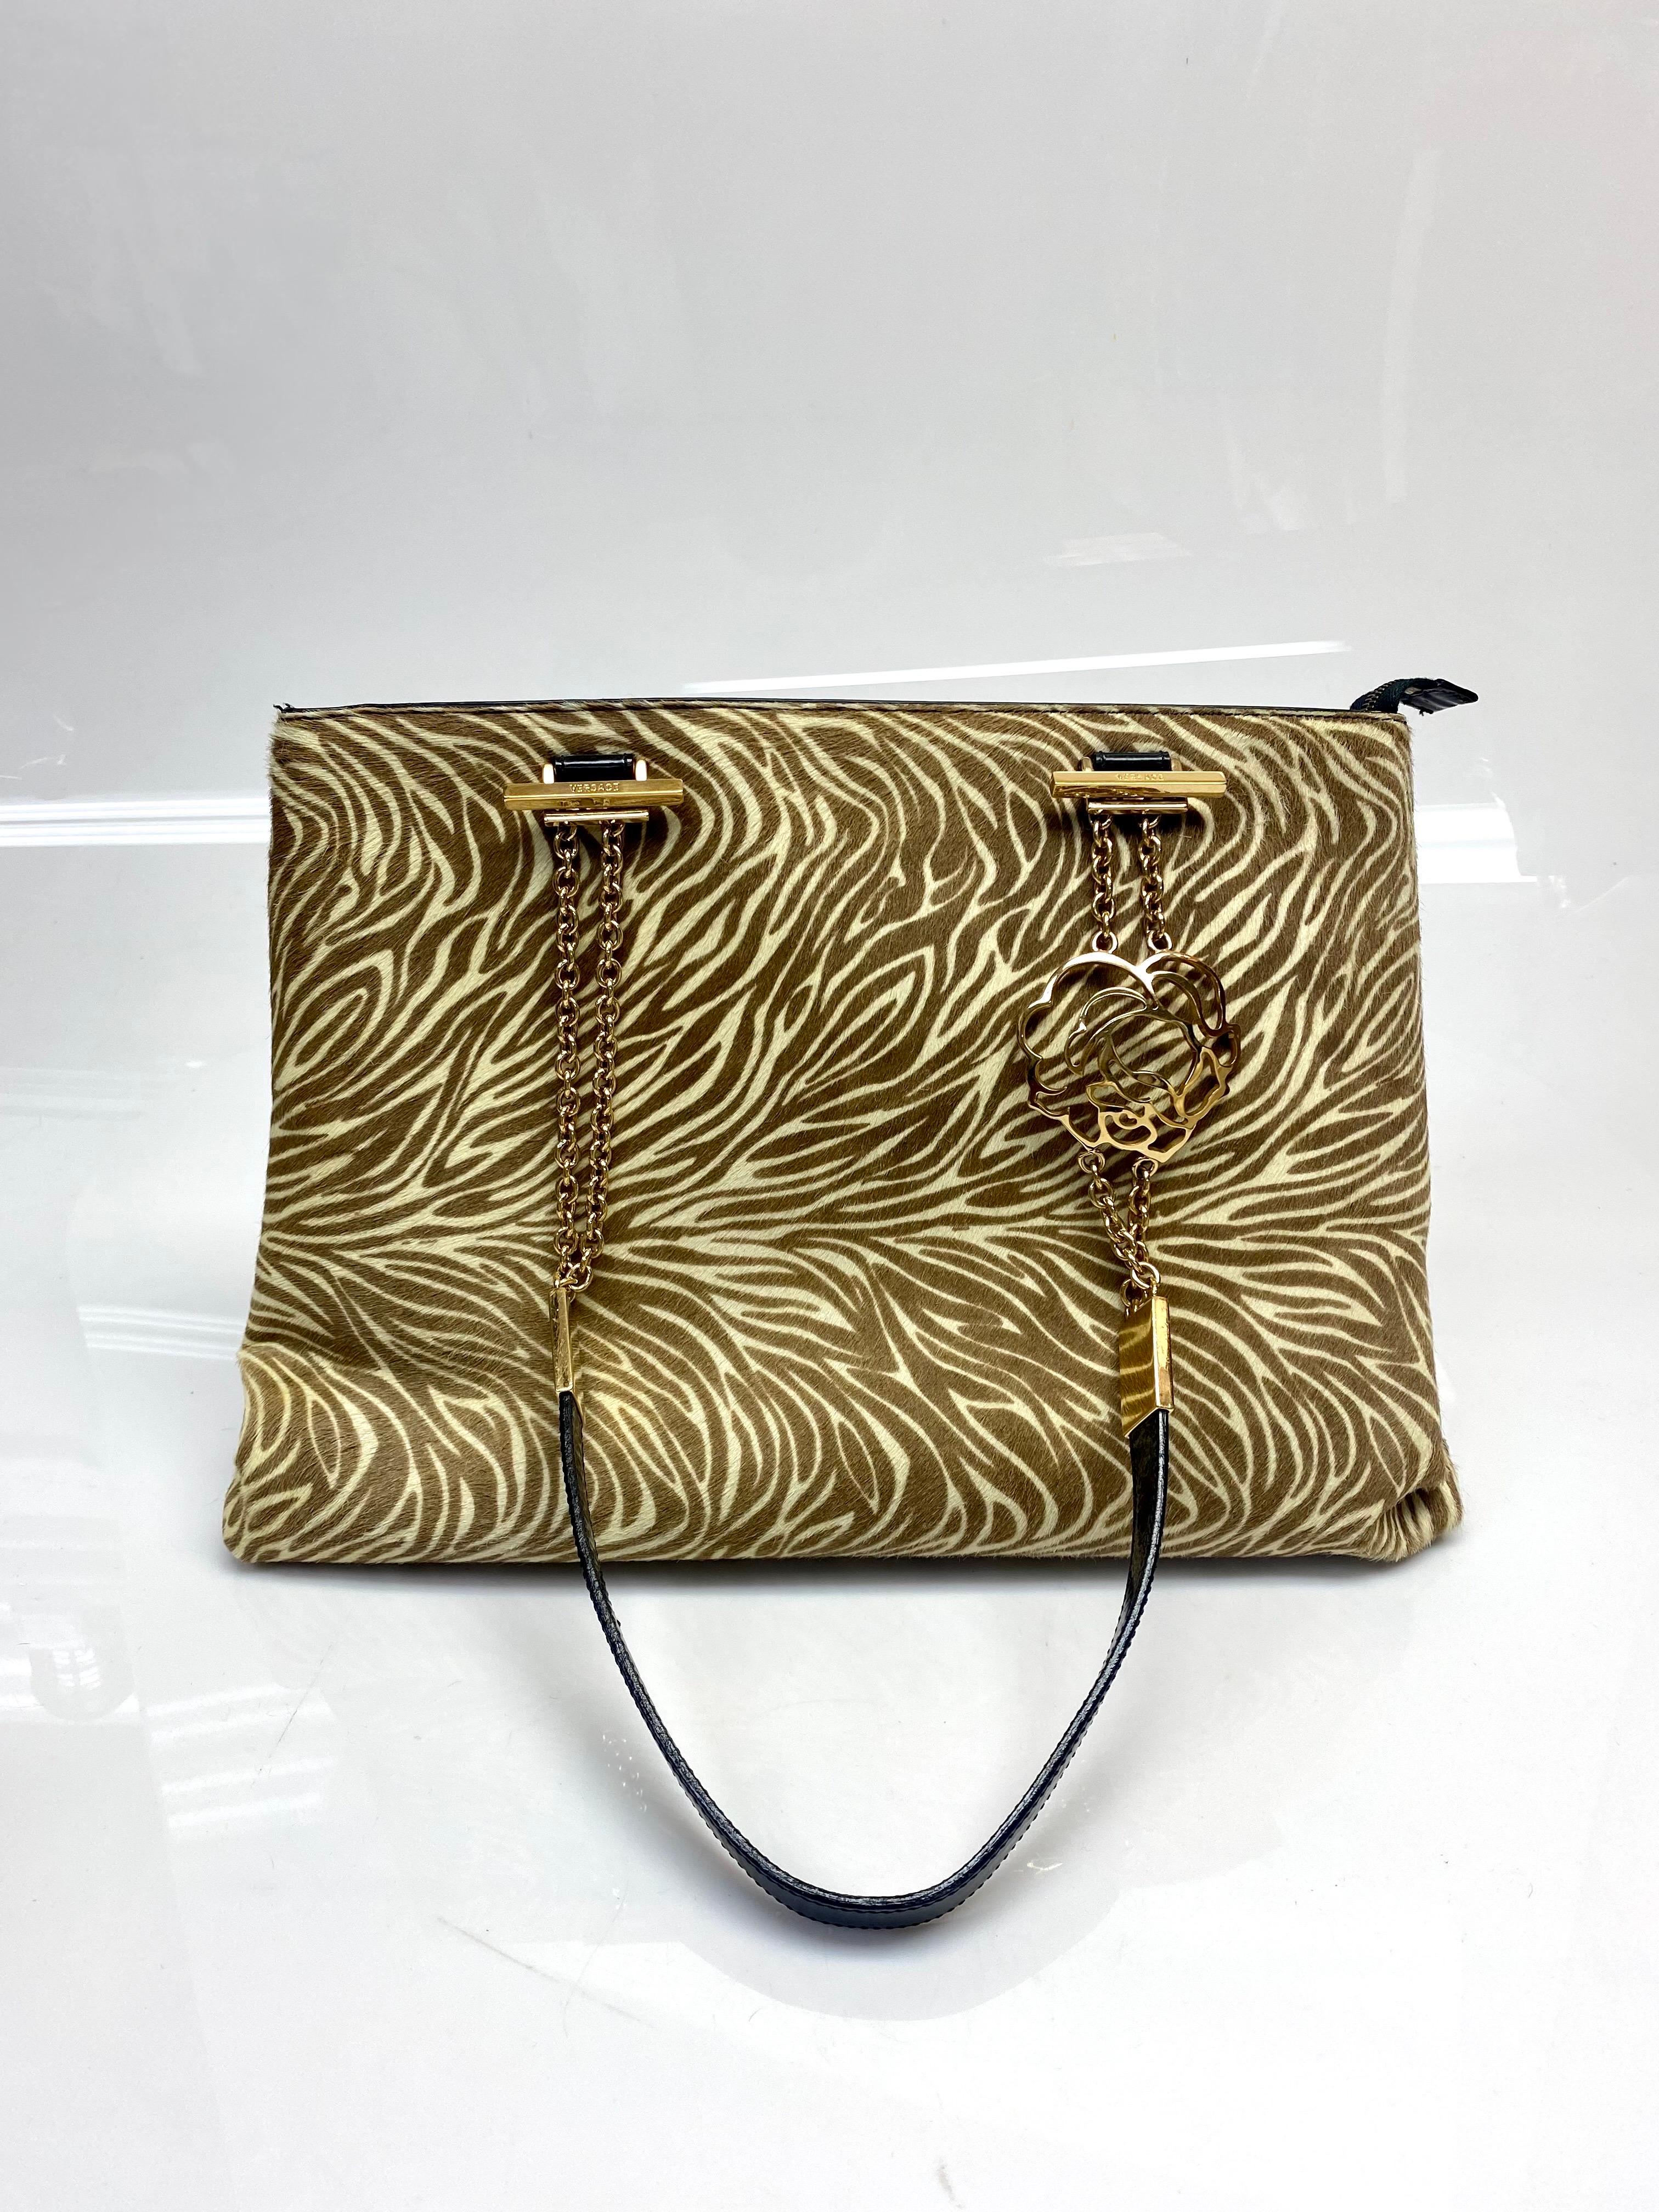 Versace Vintage Animal Print Pony Hair Shoulder Bag. This Versace shoulder bag is animal printed pony hair. Inside, there is a zippered pocket. The straps are black patent leather with gold colored chain and rose shaped detailing. This bag is in